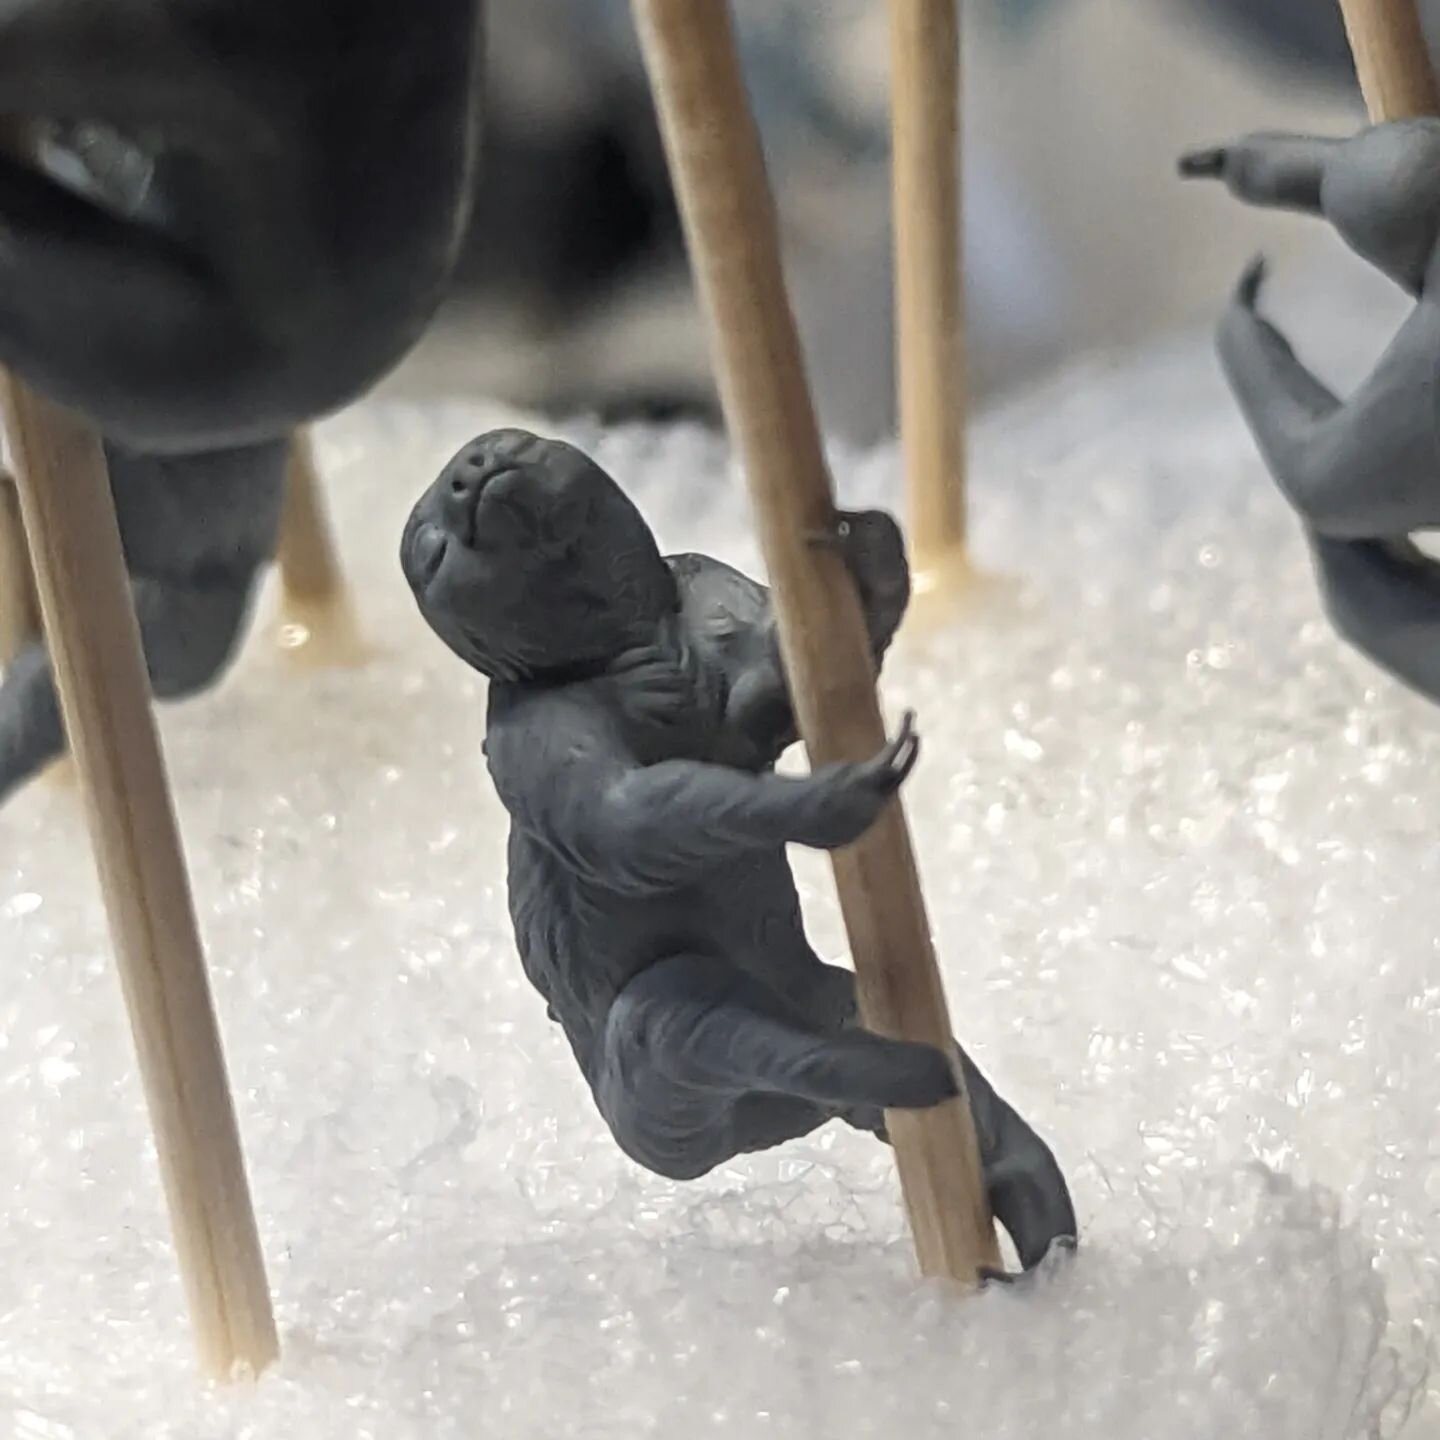 Painting up tiny sloths for dice today. Look how cute they are holding onto toothpicks to dry!!